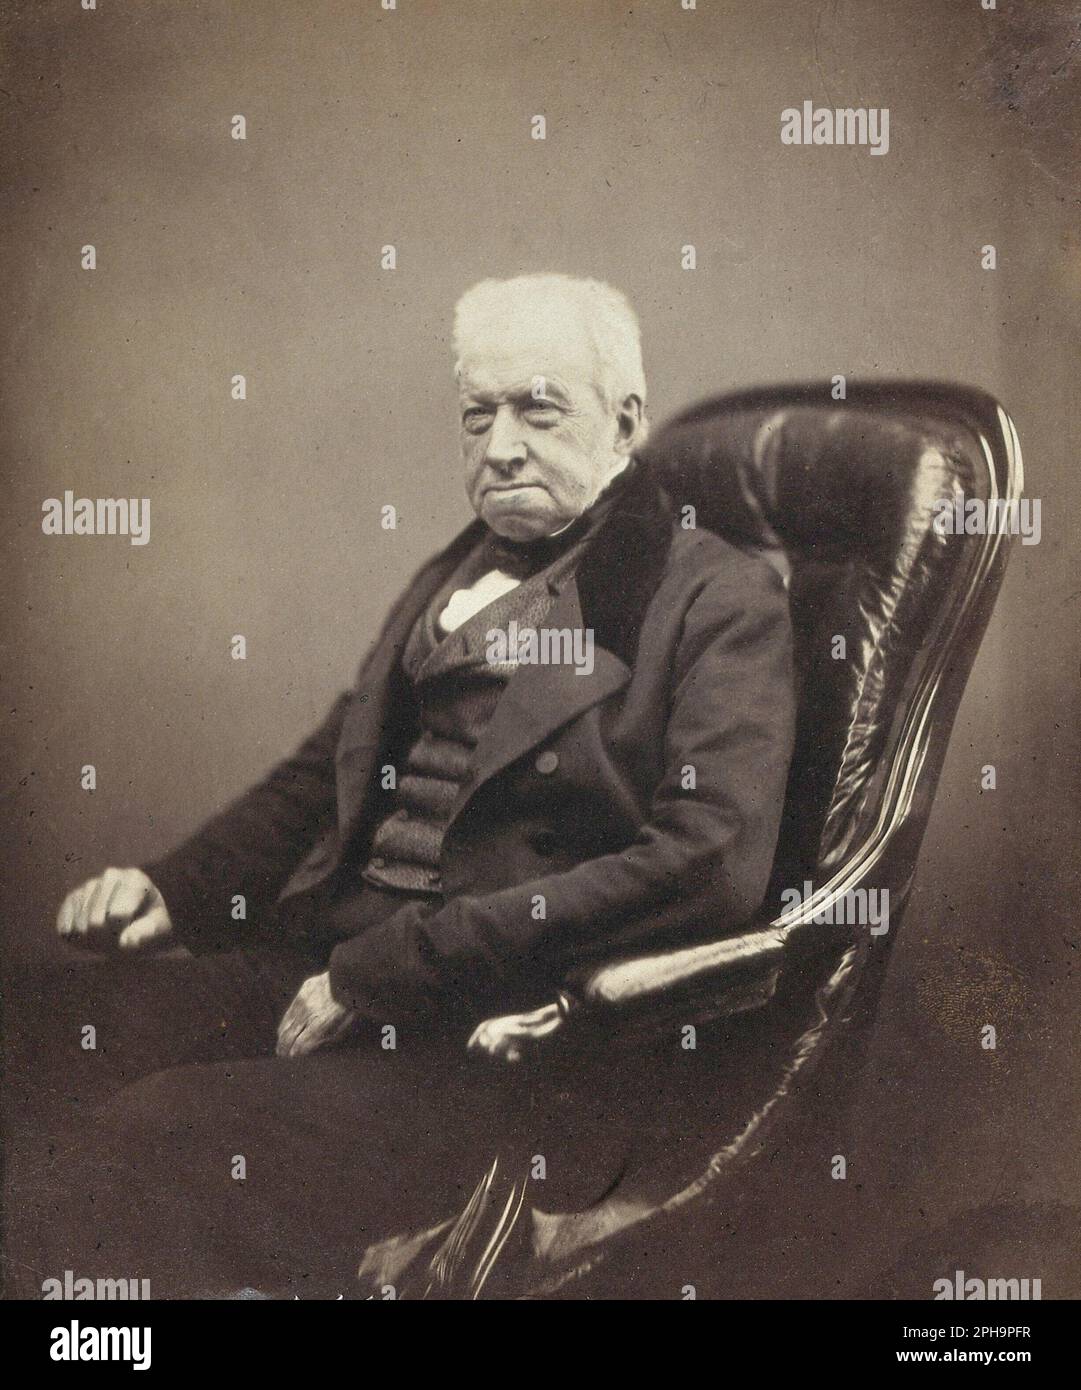 Robert Brown, 1773 – 1858, was a Scottish botanist and paleobotanist who made important contributions to botany largely through his pioneering use of the microscope, vintage photograph from 1855 Stock Photo